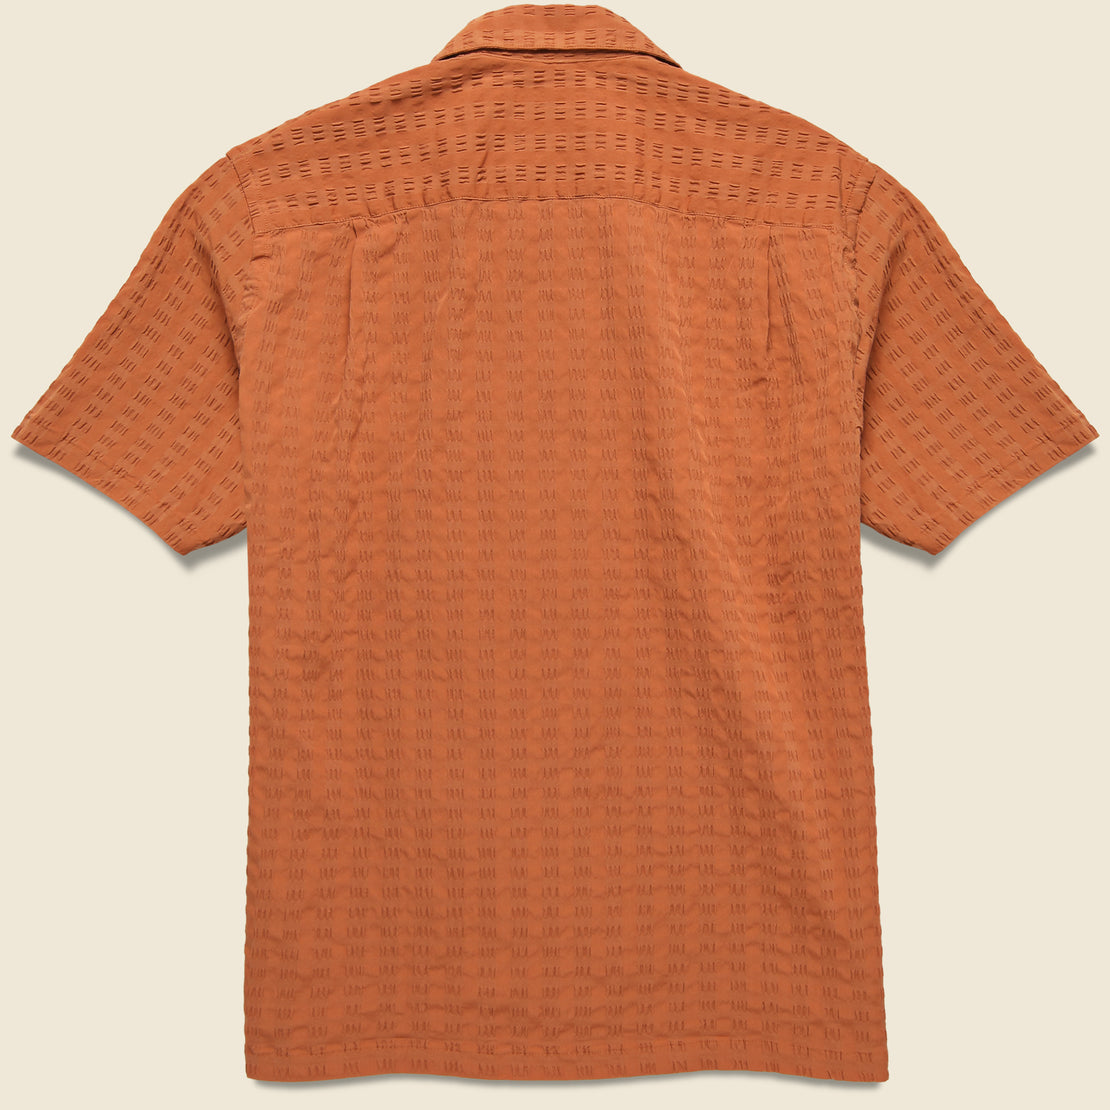 Square Seersucker Camp Shirt - Terracotta - Portuguese Flannel - STAG Provisions - Tops - S/S Woven - Other Pattern